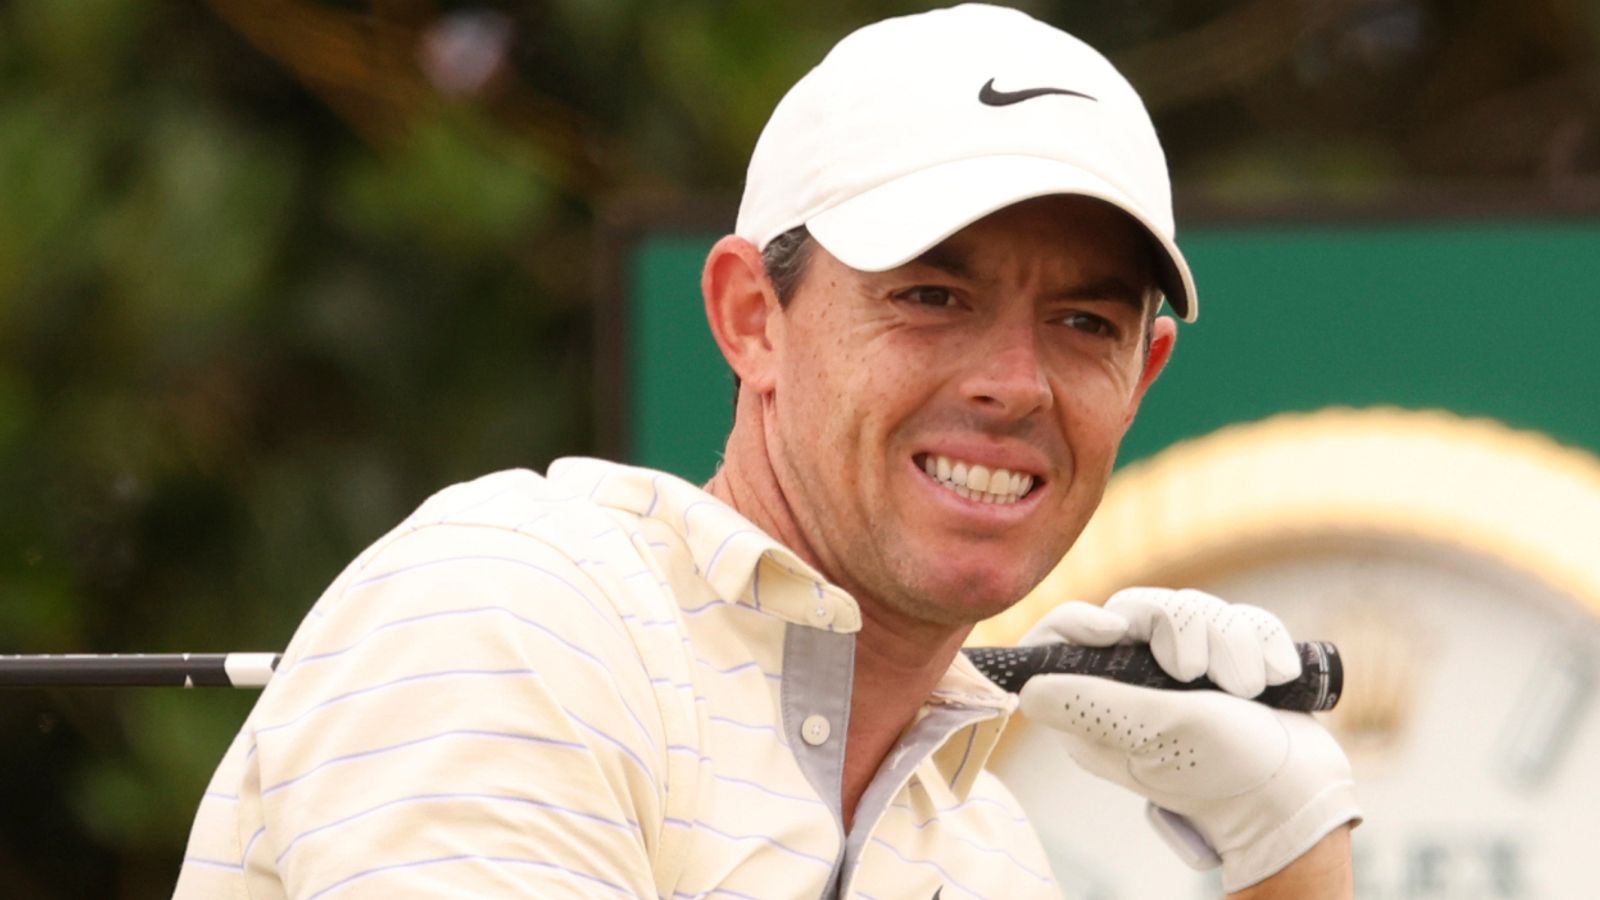 bmw-pga-championship-rory-mcilroy-says-it-will-be-hard-to-stomach-seeing-liv-golf-members-at-wentworth